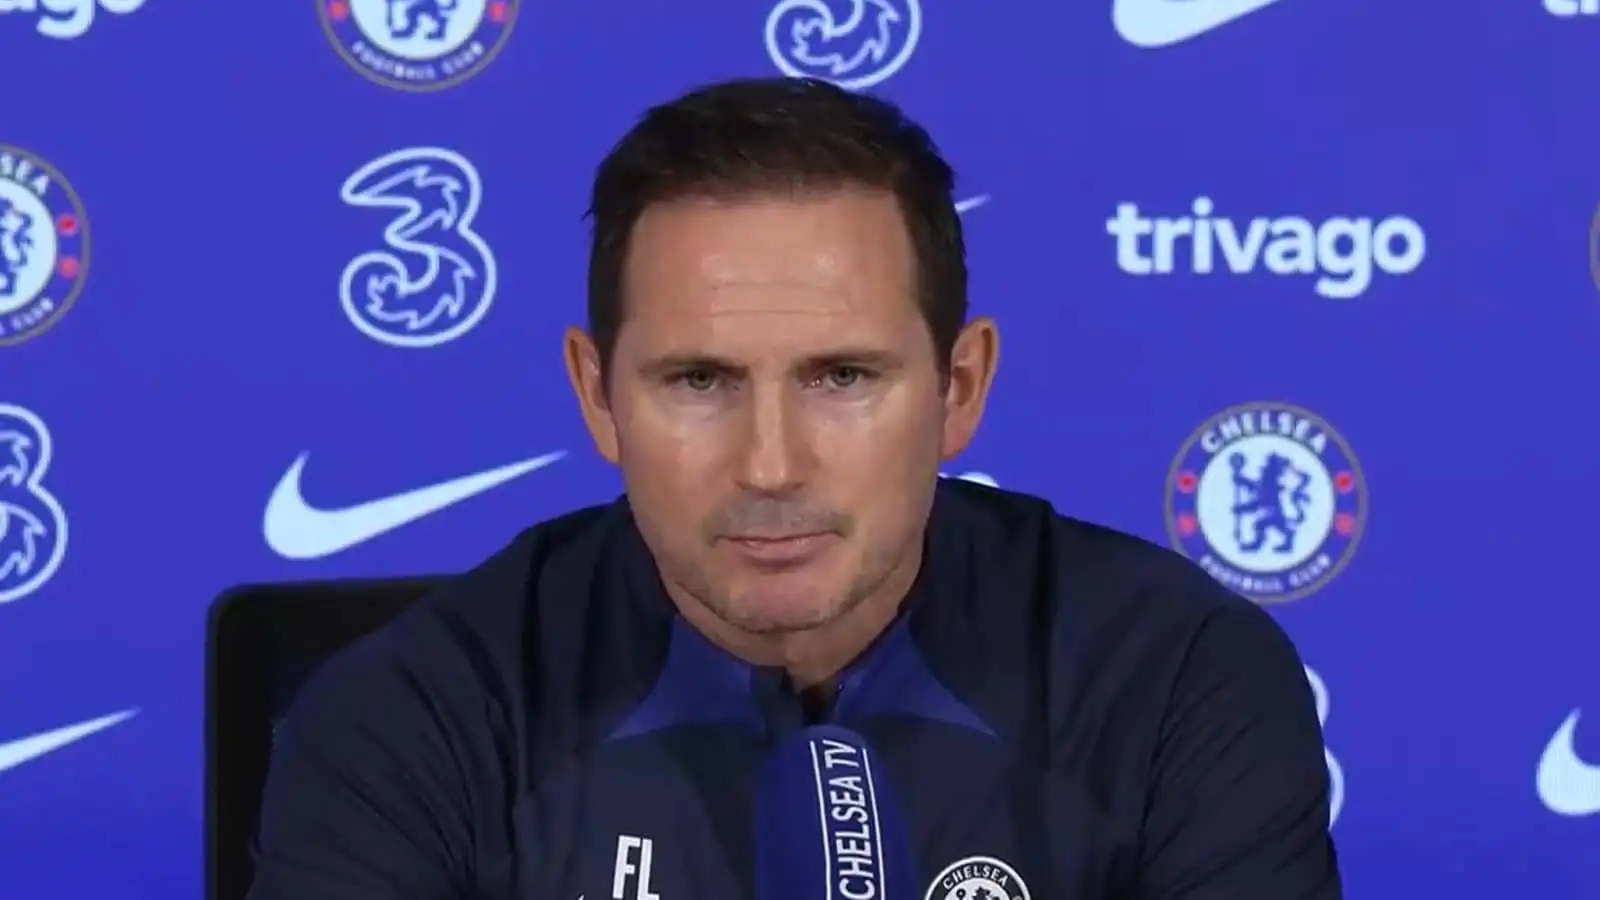 Chelsea manager Frank Lampard (image courtesy of skysports.com)